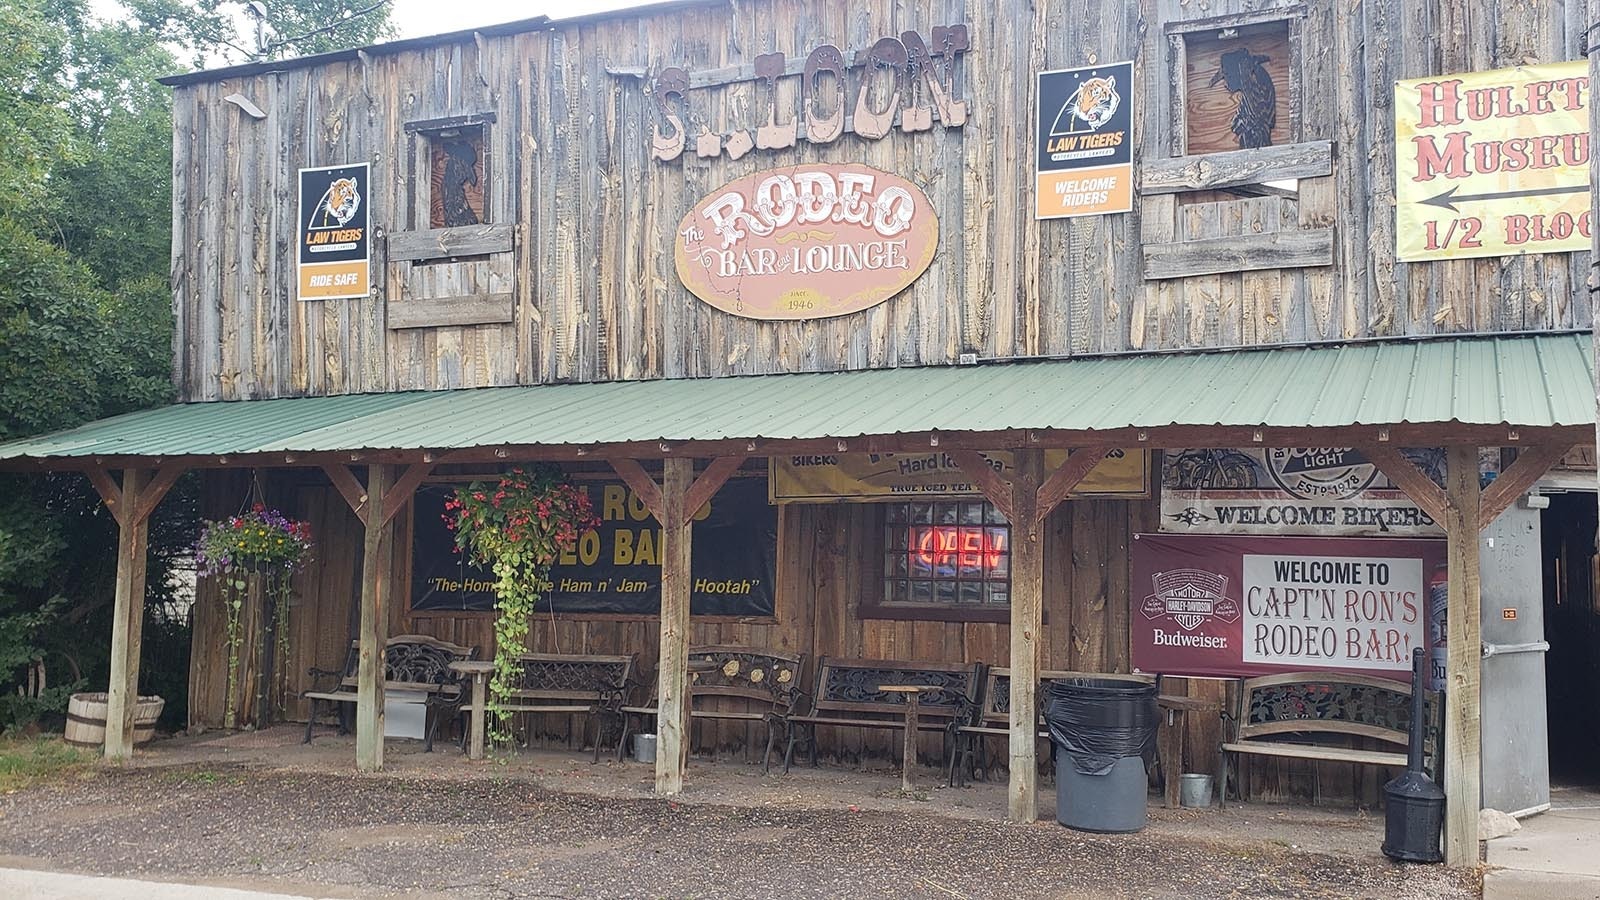 Capt'n Ron's Rodeo Bar Lounge has held the famous Ham-N-Jam for the past 35 years in Hulett.